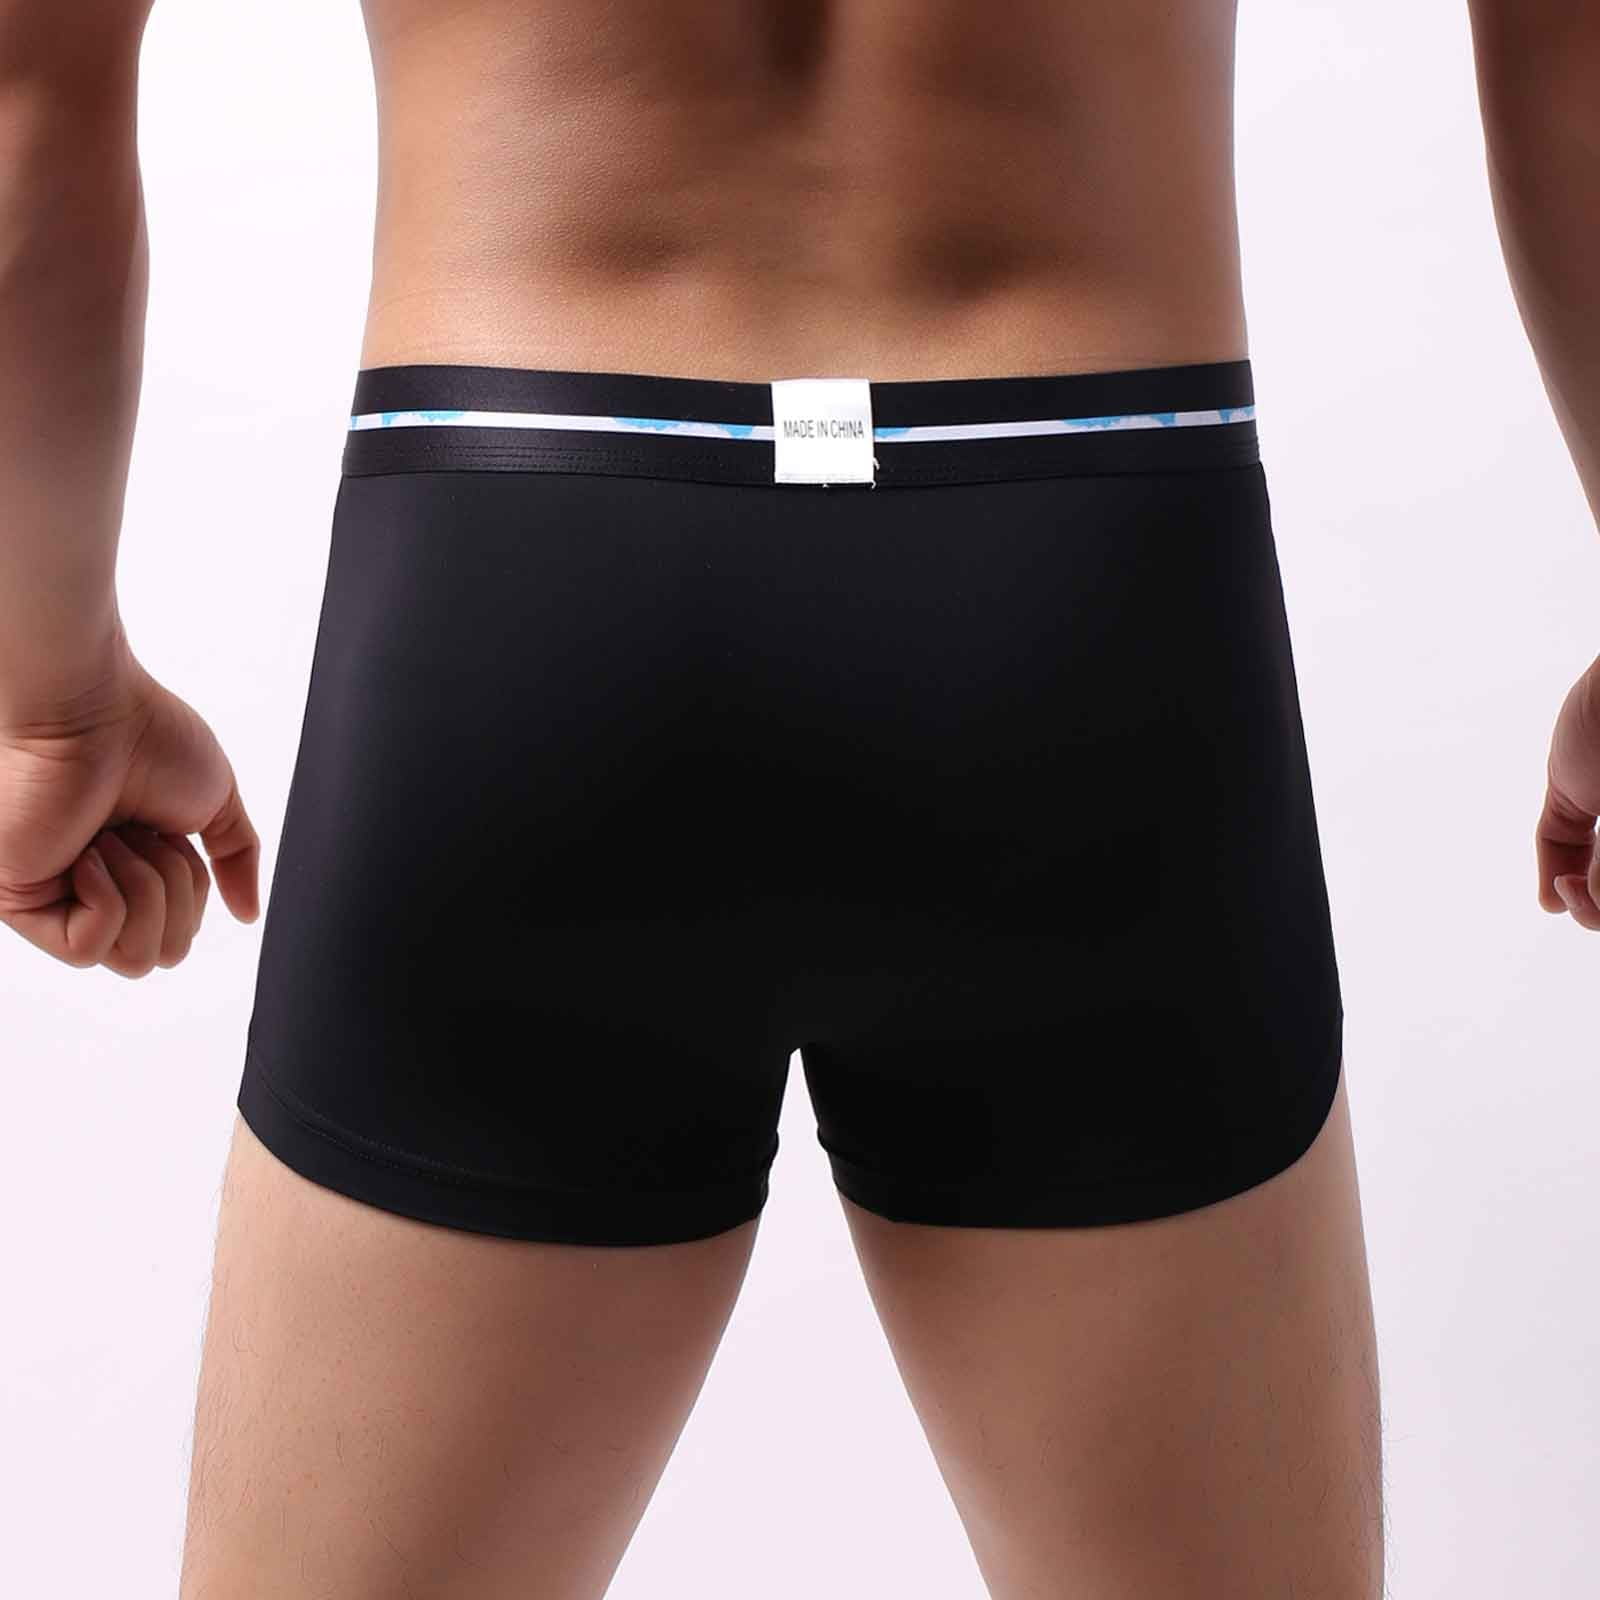 AnuirheiH Men's Lingerie Soft Briefs Underpants Knickers Shorts Sexy  Underwear 4-6$ off 2nd 